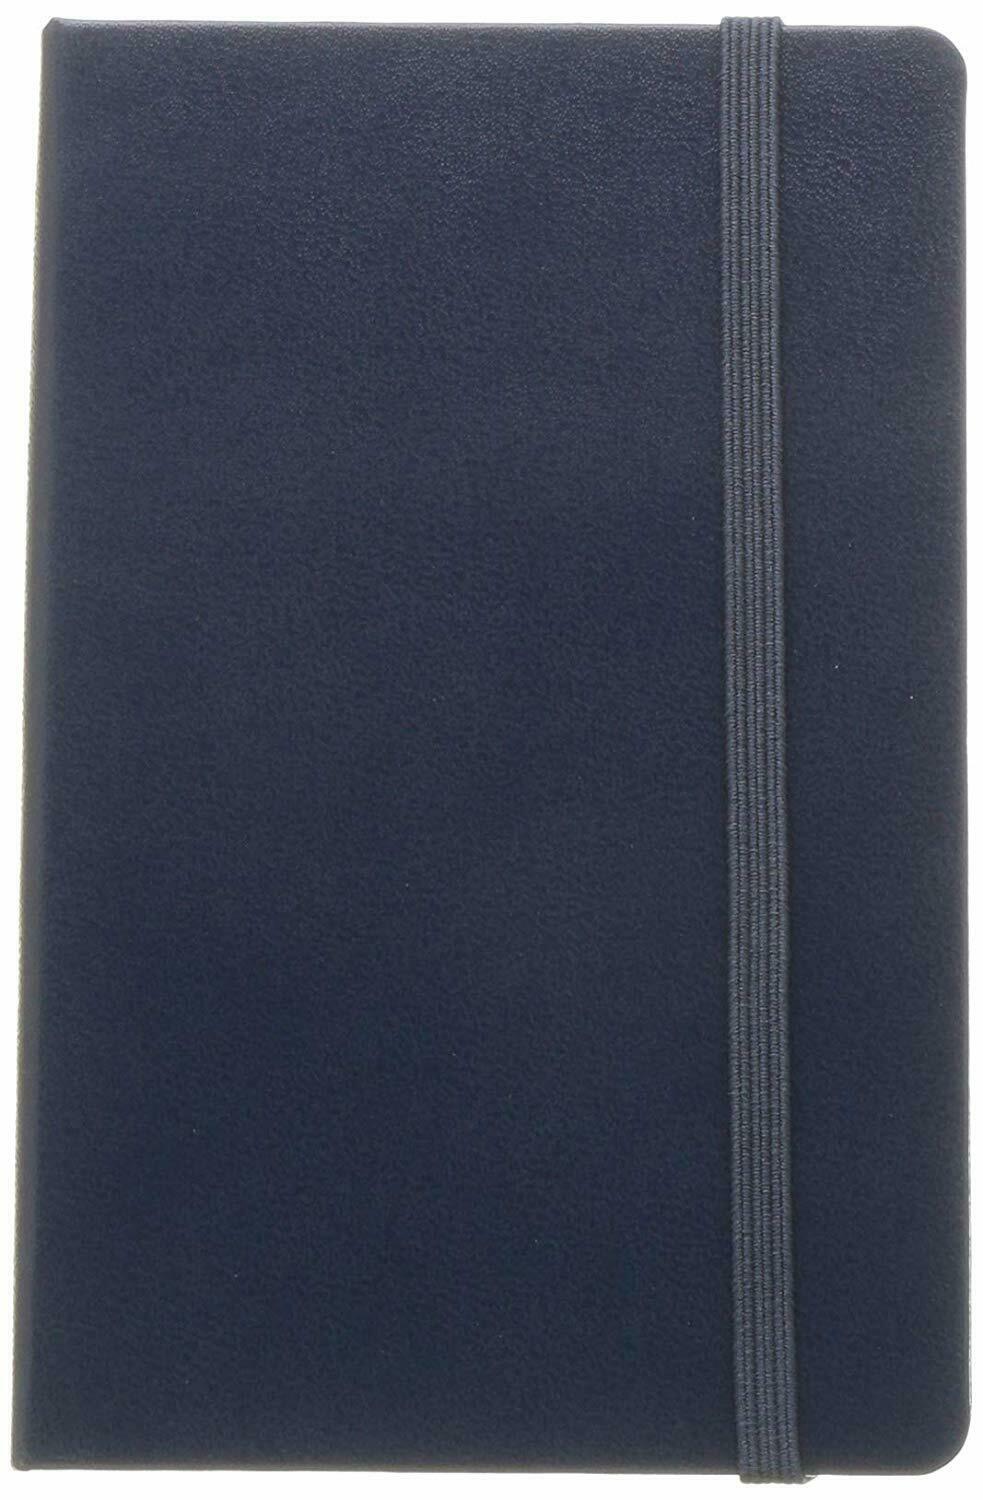 Moleskine Classic Notebook, Hard Cover, Pocket (5" X 8.25") Ruled/lined, Sapphi